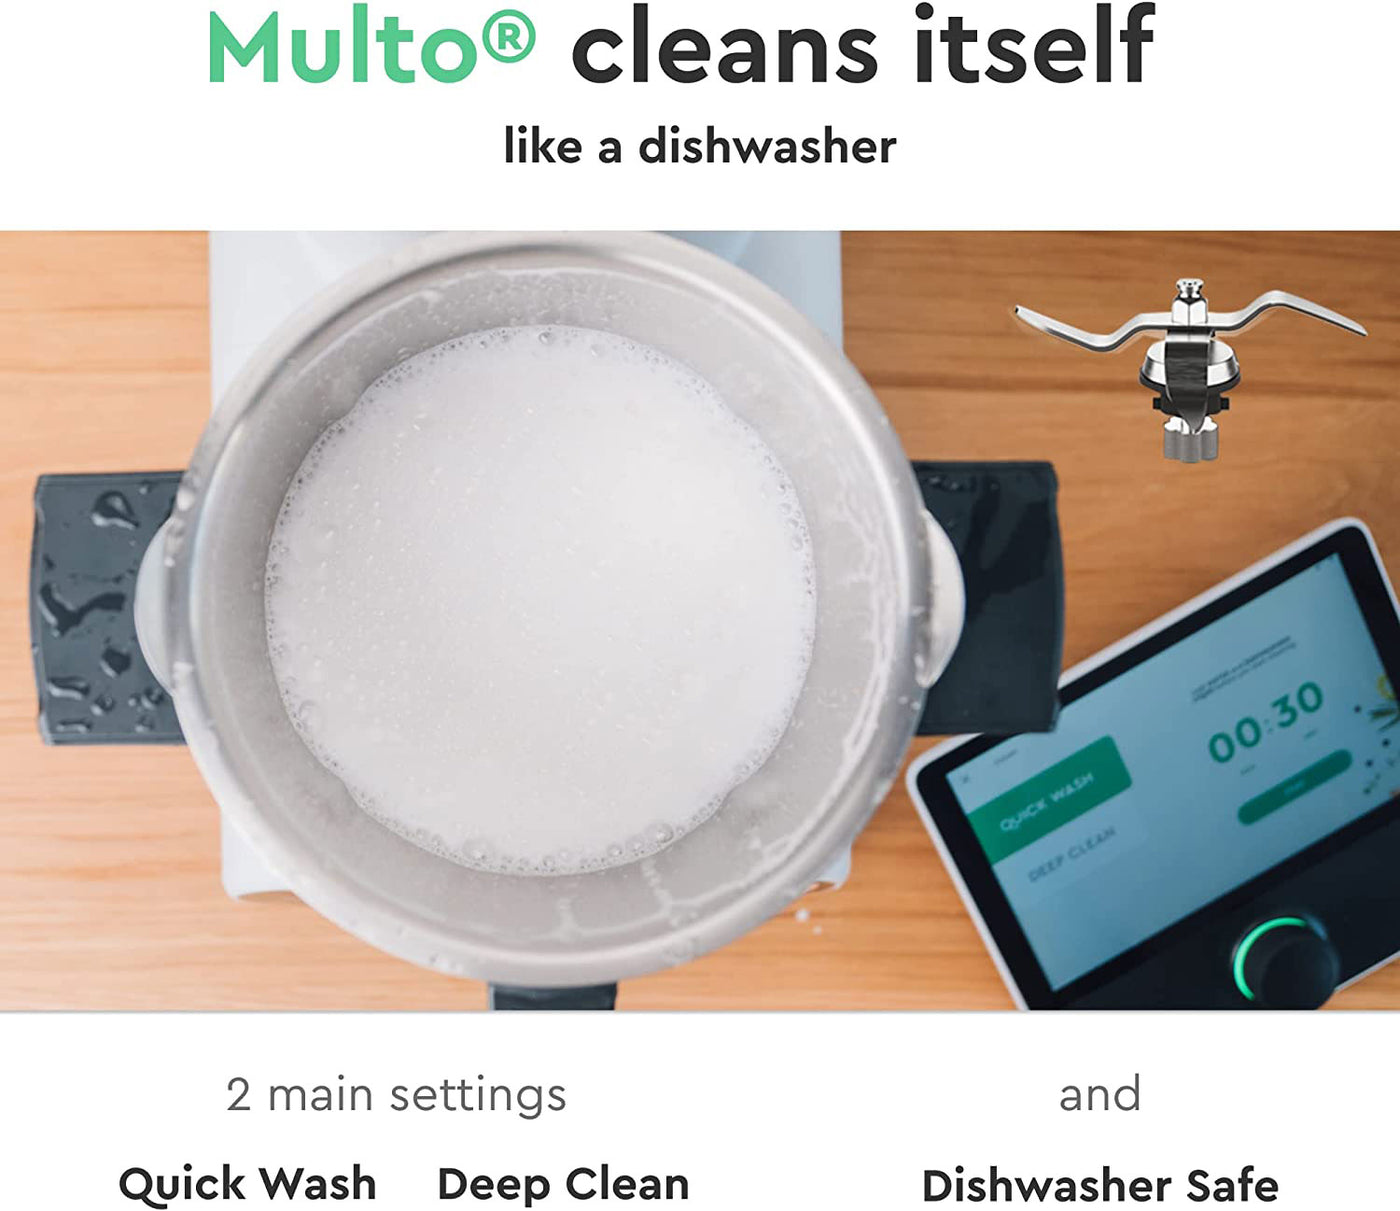 Multo Compact Multi-Functional Food Processor Guided Recipes, Chop, Knead, Steam And Cook All-In-One Cooker - Kitchen Universe